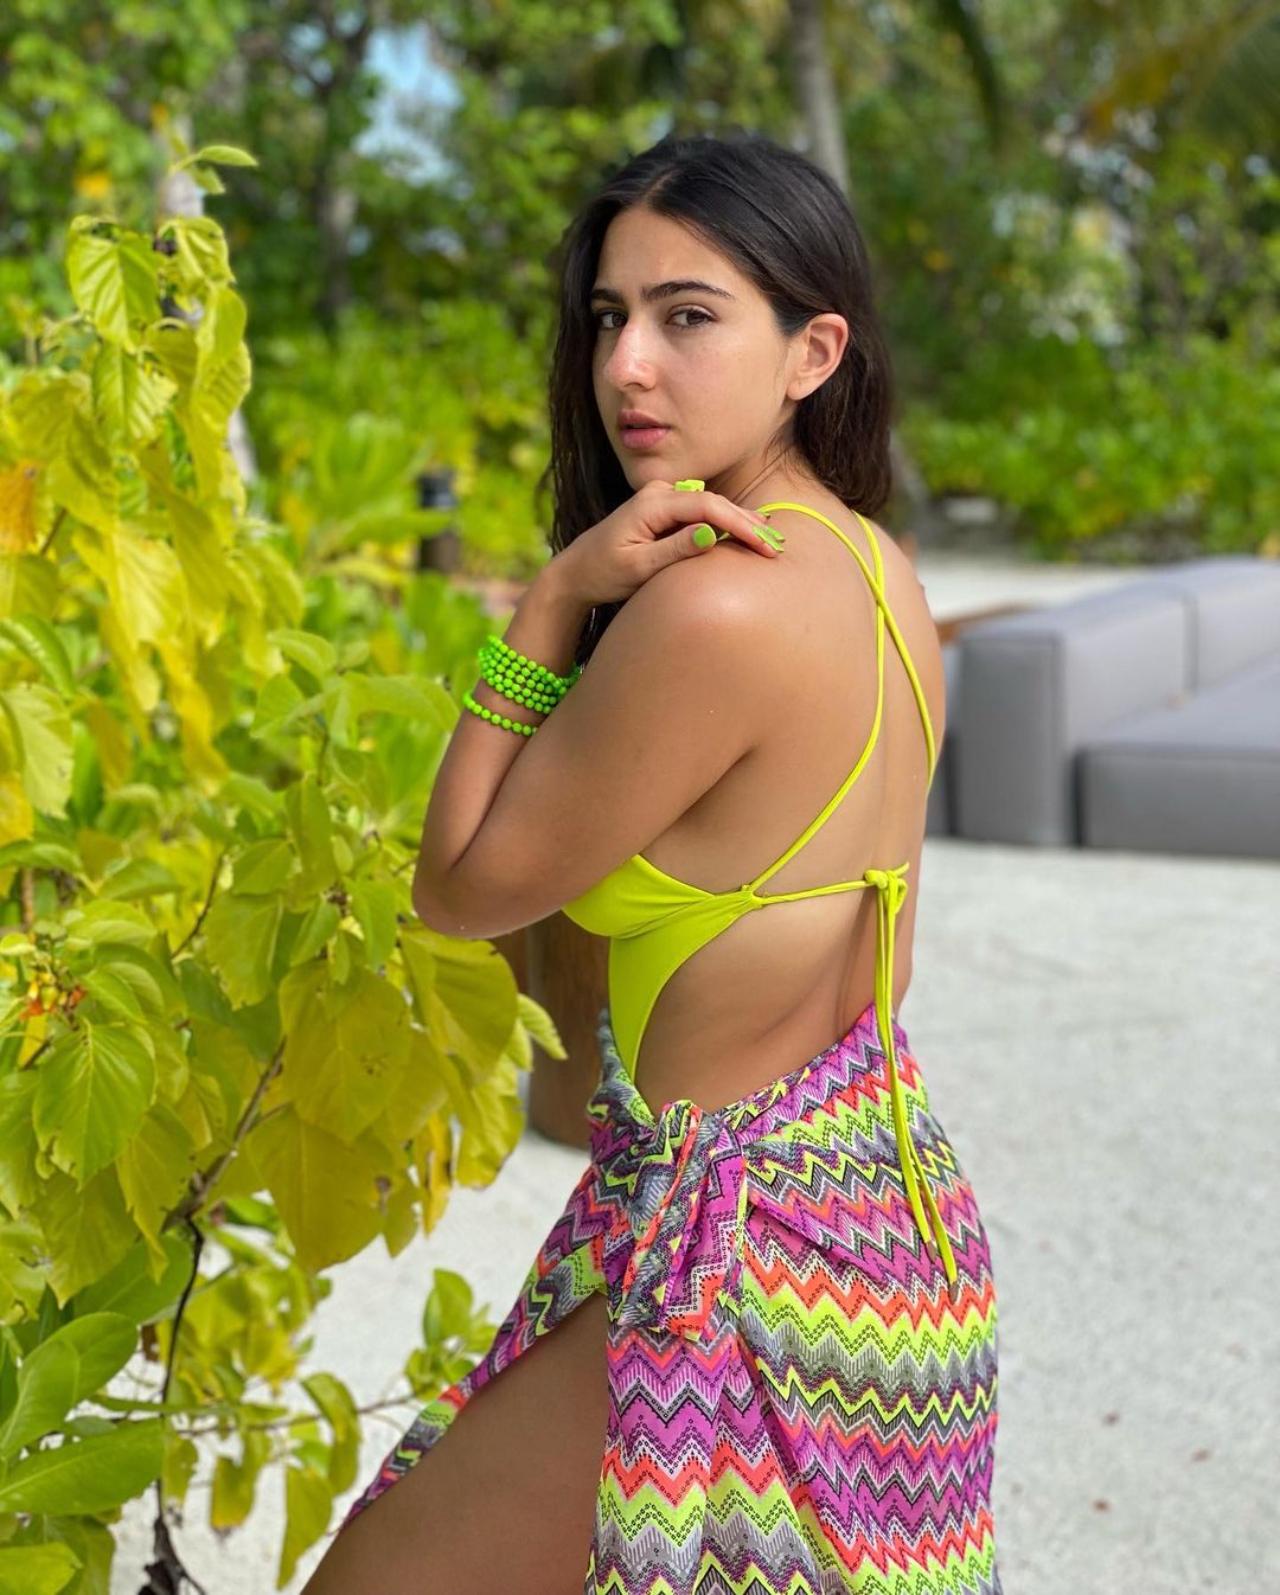 The 27-year-old actress is an avid traveller who cannot get enough of the beaches and the mountains. She never fails to stun her fans with her holiday pictures. This time it's her beachwear collection that has her eyes. The actress never misses the opportunity to flaunt her toned body in top-notch beachwear